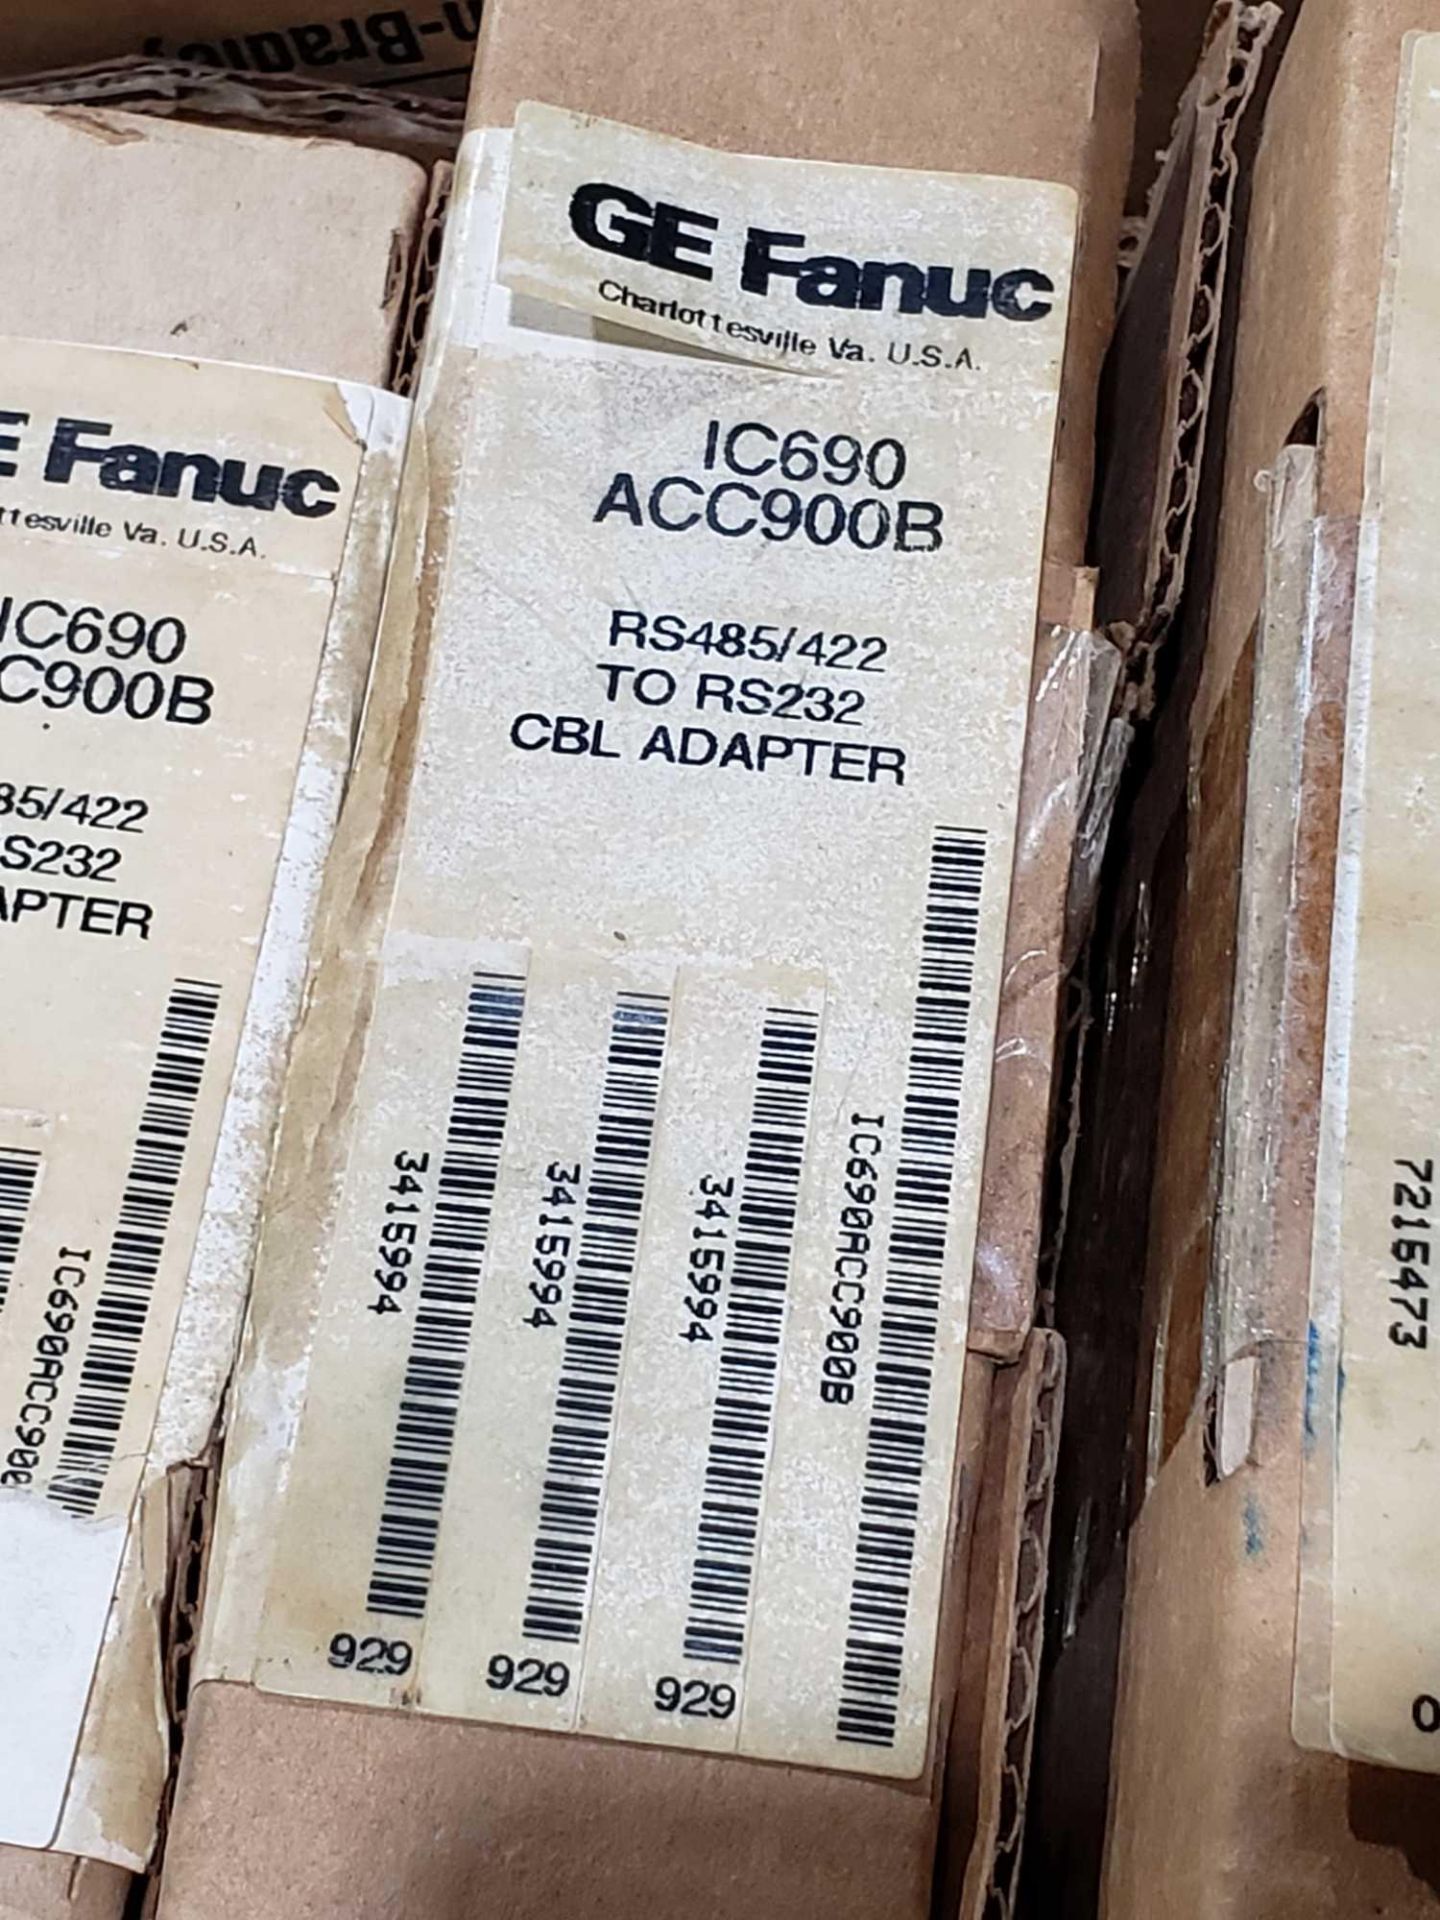 Qty 5 - GE Fanuc model IC690ACC900B, new in boxes. - Image 2 of 2